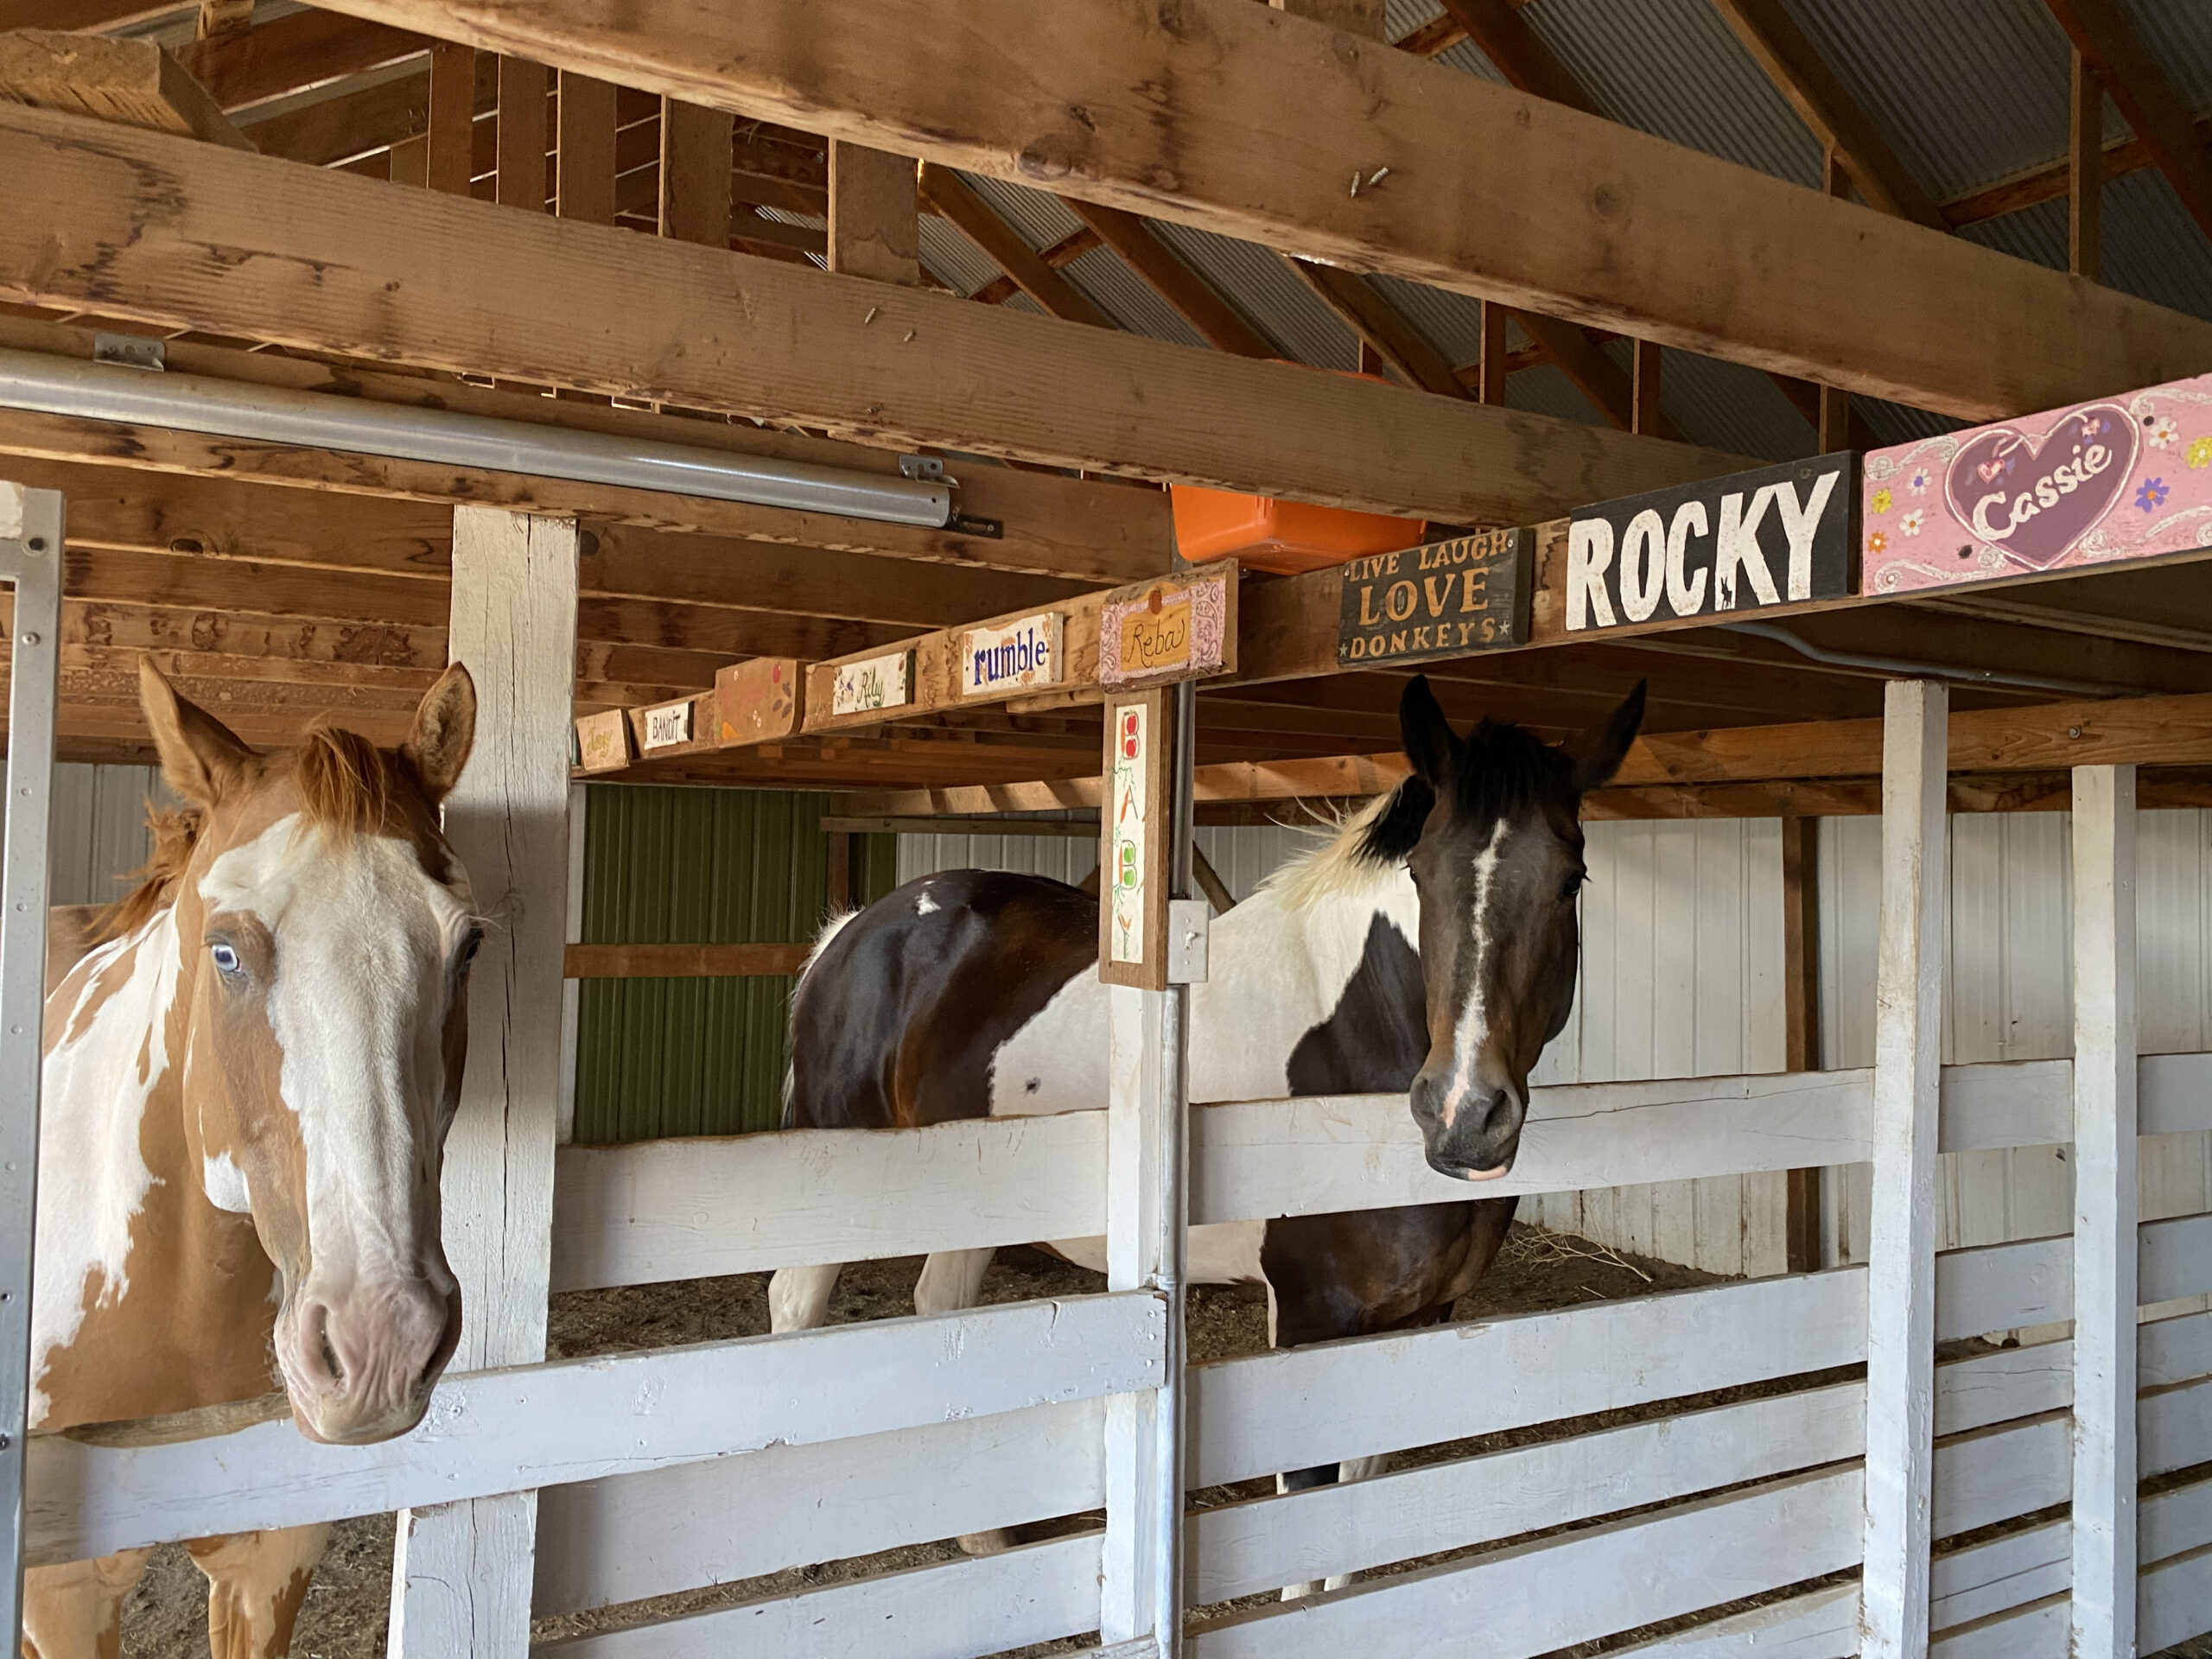 Two paint horses inside of a barn poke their heads through a white fence. Wooden plaques with the names of horses are affixed to a board overhead.